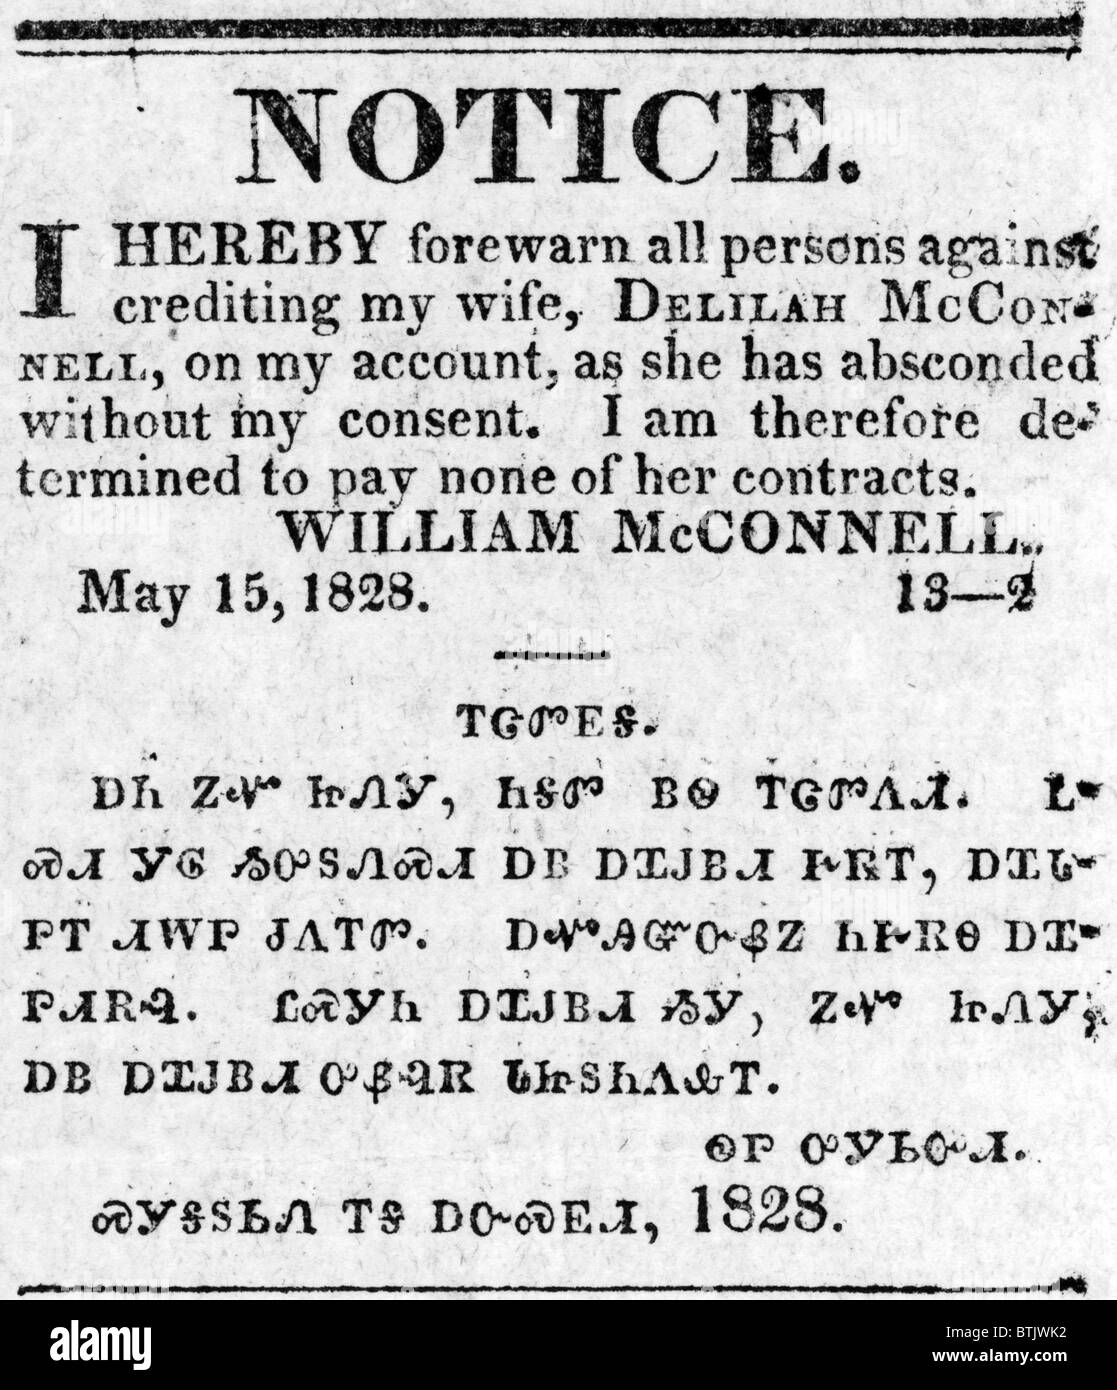 Cherokee Tribe. An advertisement from the Cherokee Phoenix newspaper, printed in Bilingual notice in English and Cherokee stating that William McConnell will no longer pay the debts of his wife Delilah McConnell as she has left him. New Echota, Georgia, May 28, 1828 Stock Photo